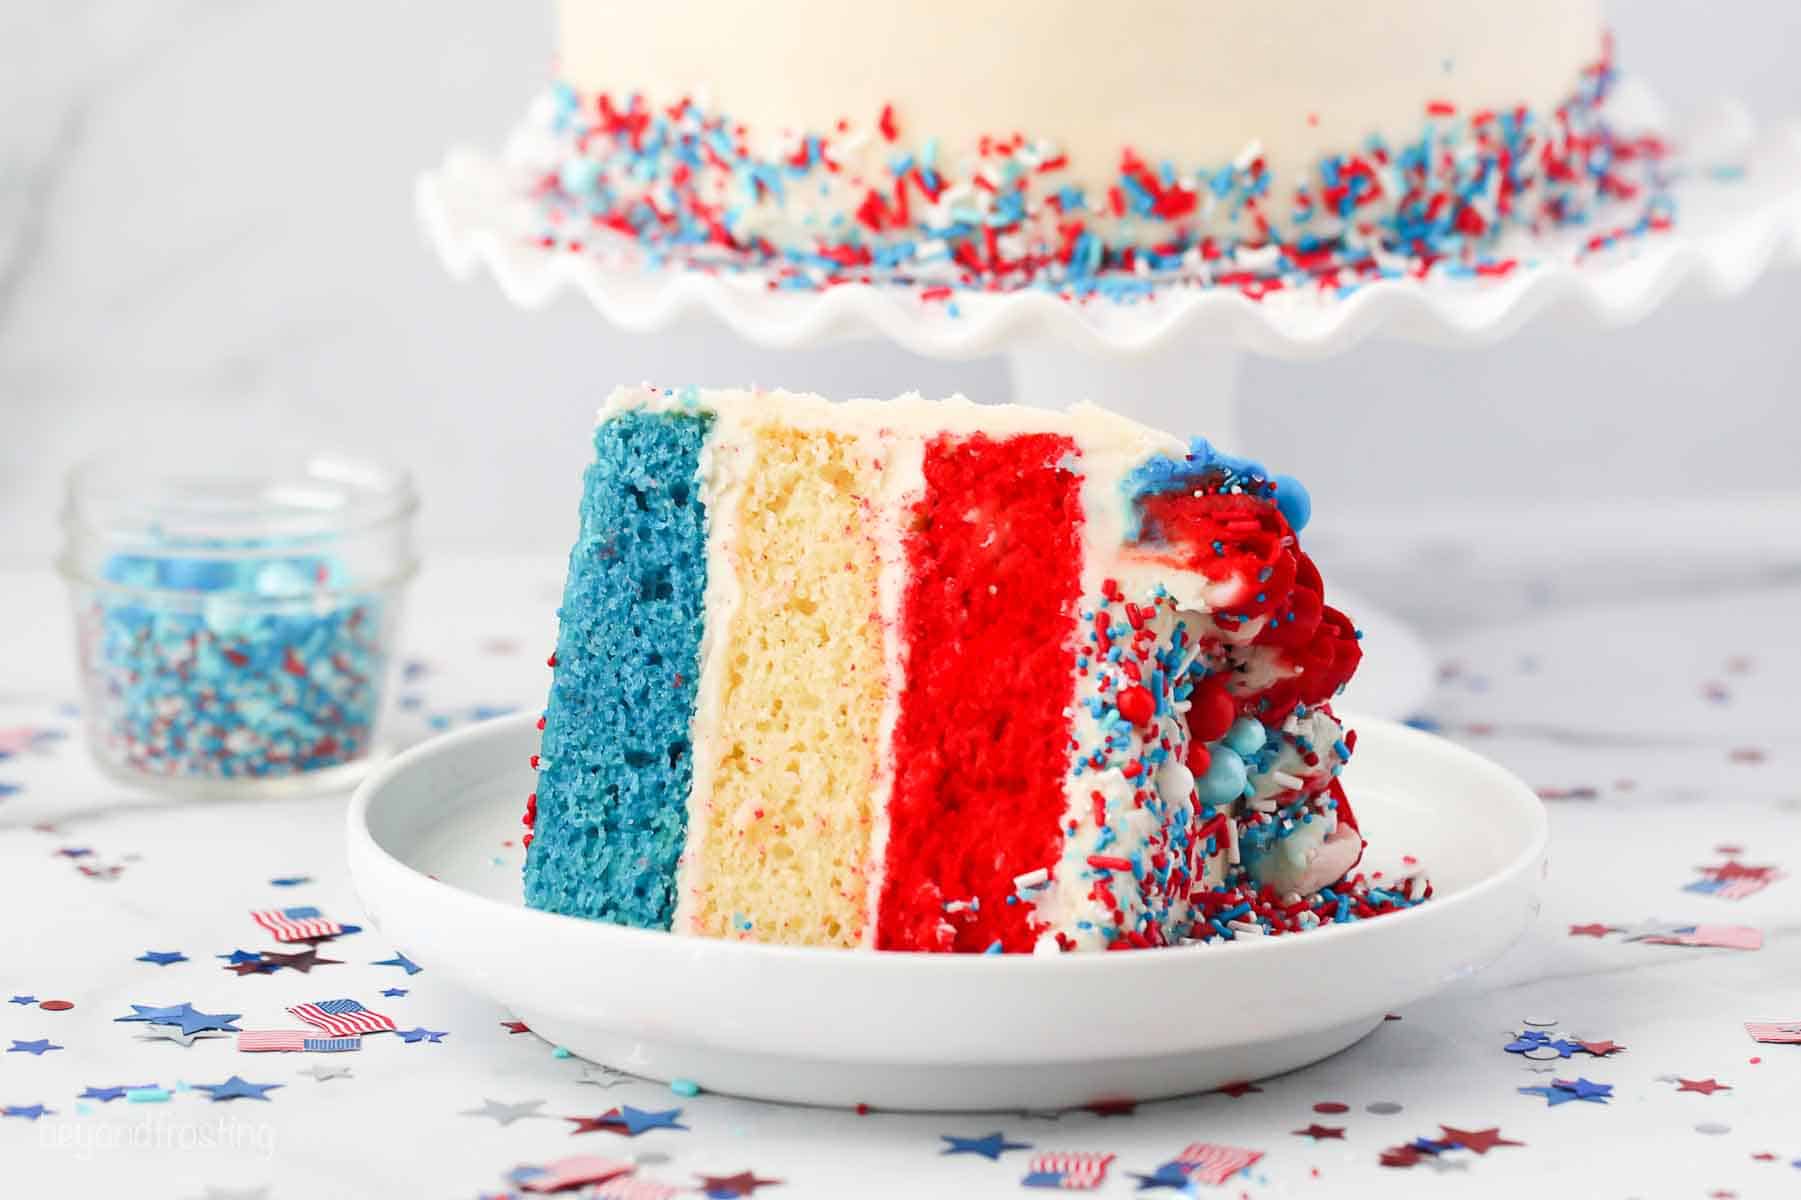 a slice of 3 layer cake with layers of blue, white and red cake. Patriotic confetti on the table.